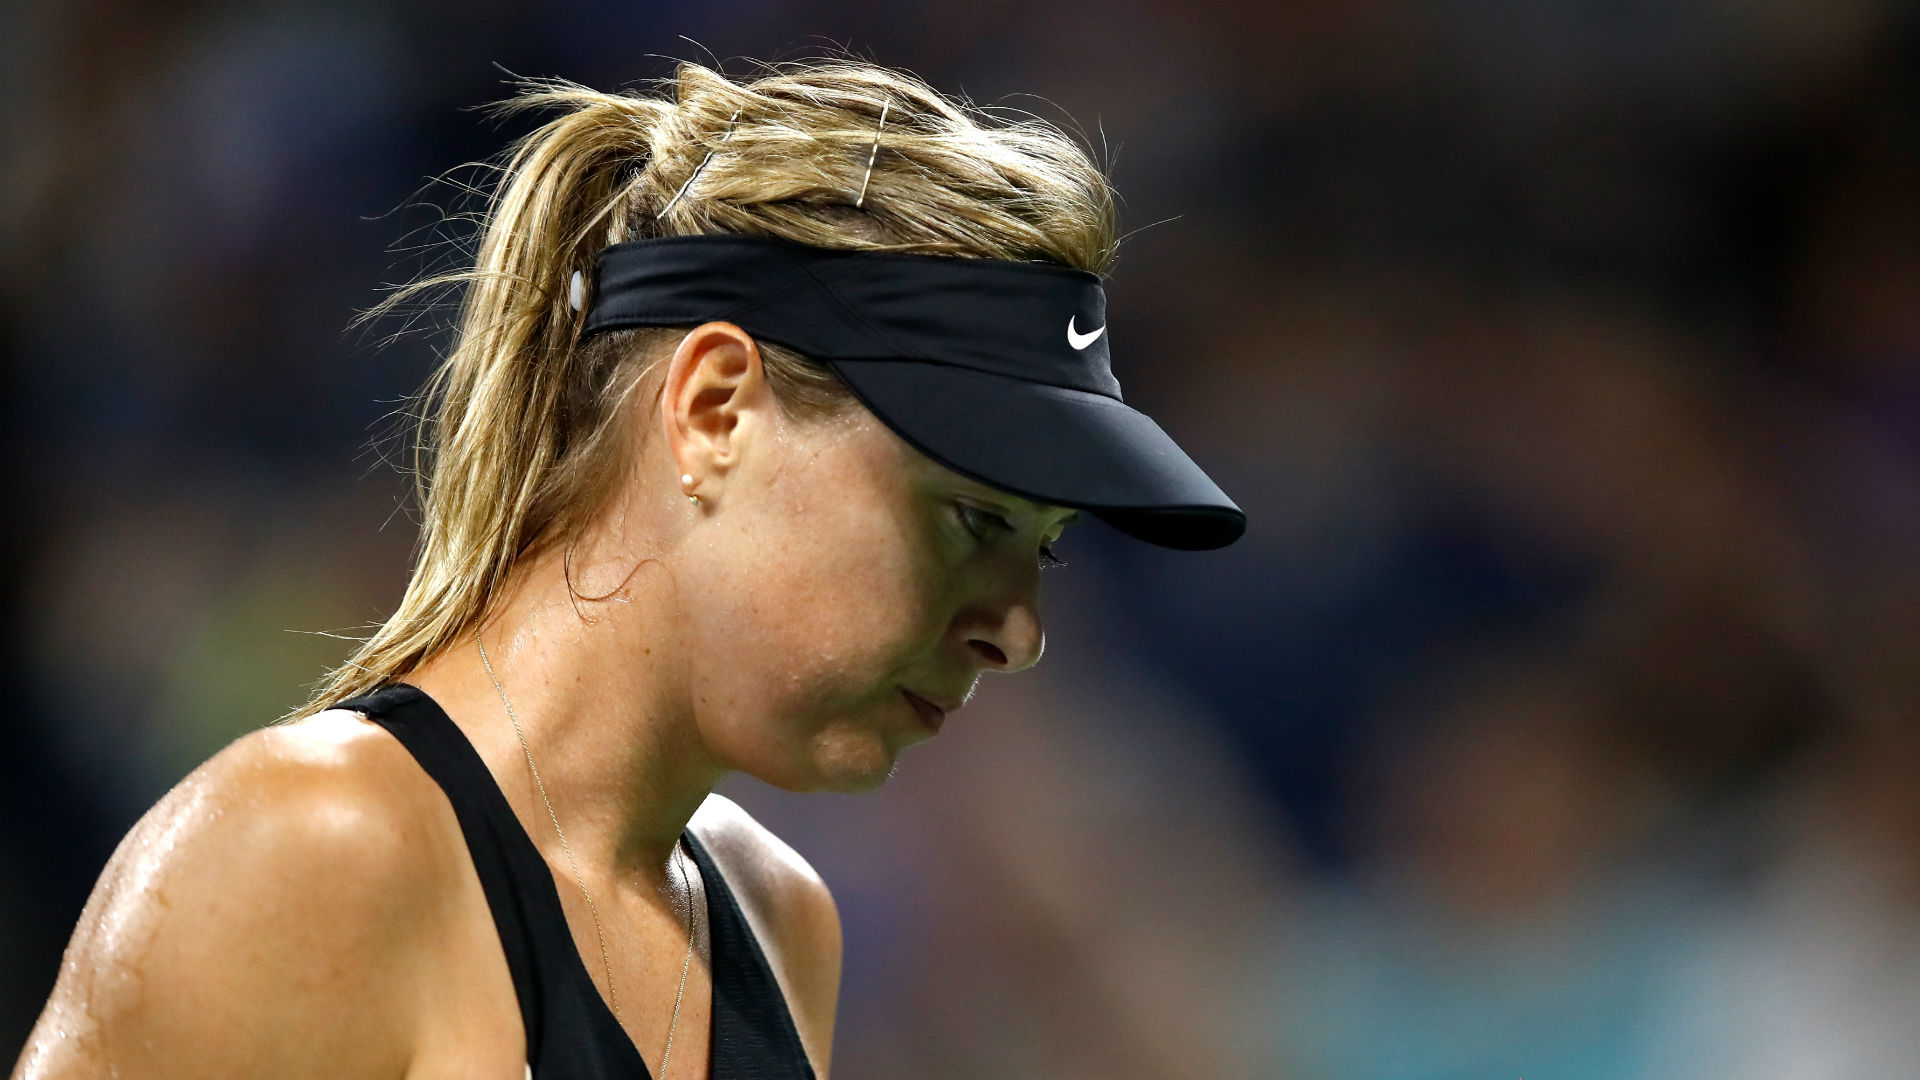 Due to a shoulder injury, two-time French Open champion Maria Sharapova will not be playing at Roland Garros this year.